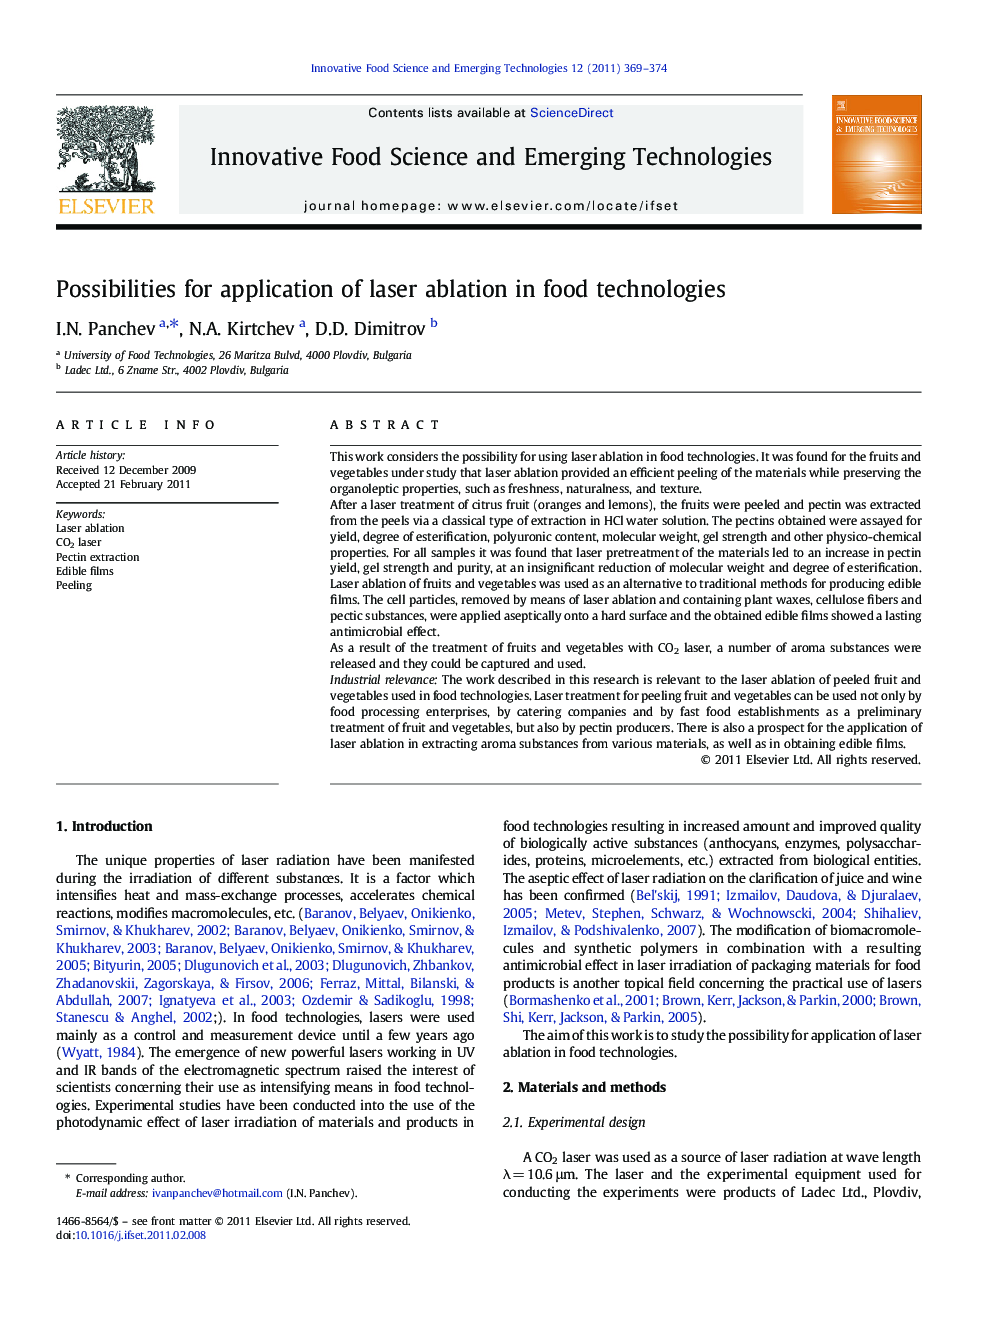 Possibilities for application of laser ablation in food technologies